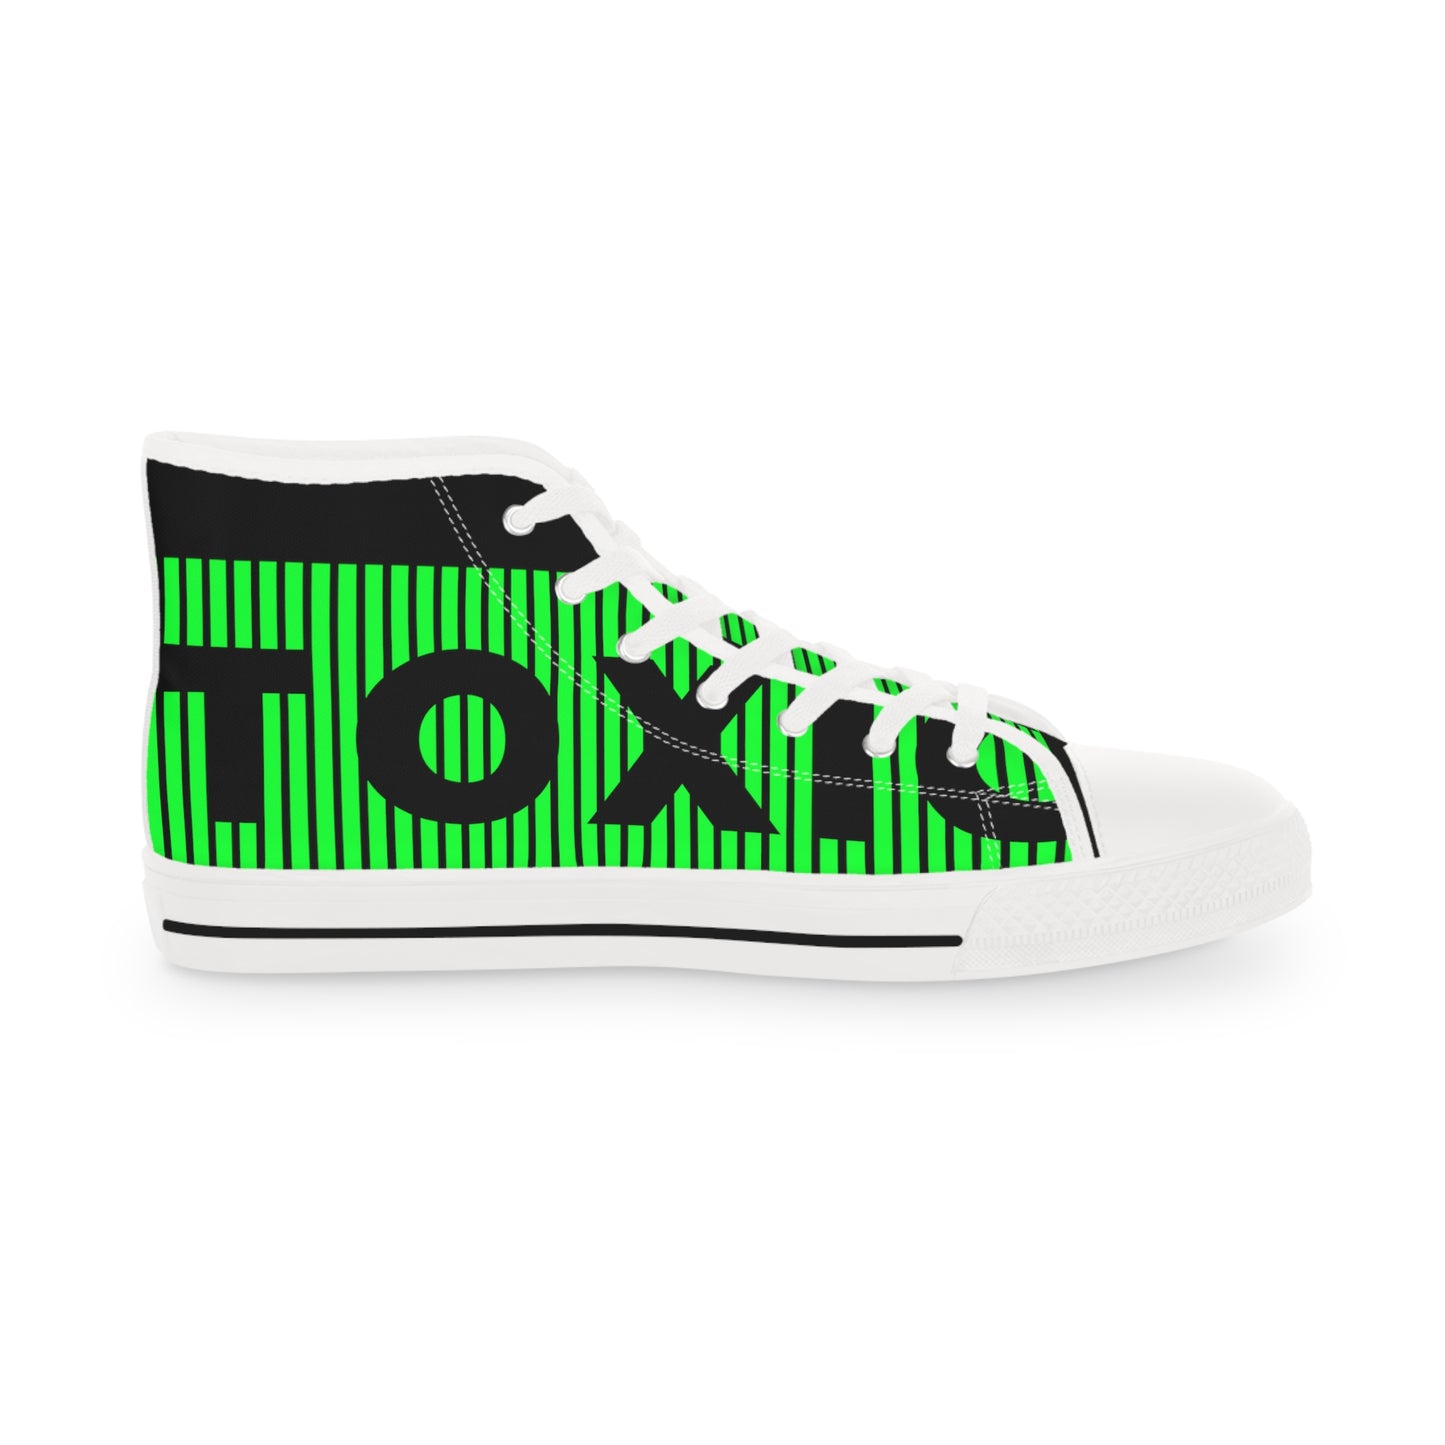 Limited Edition High Top Sneakers - TOXIC